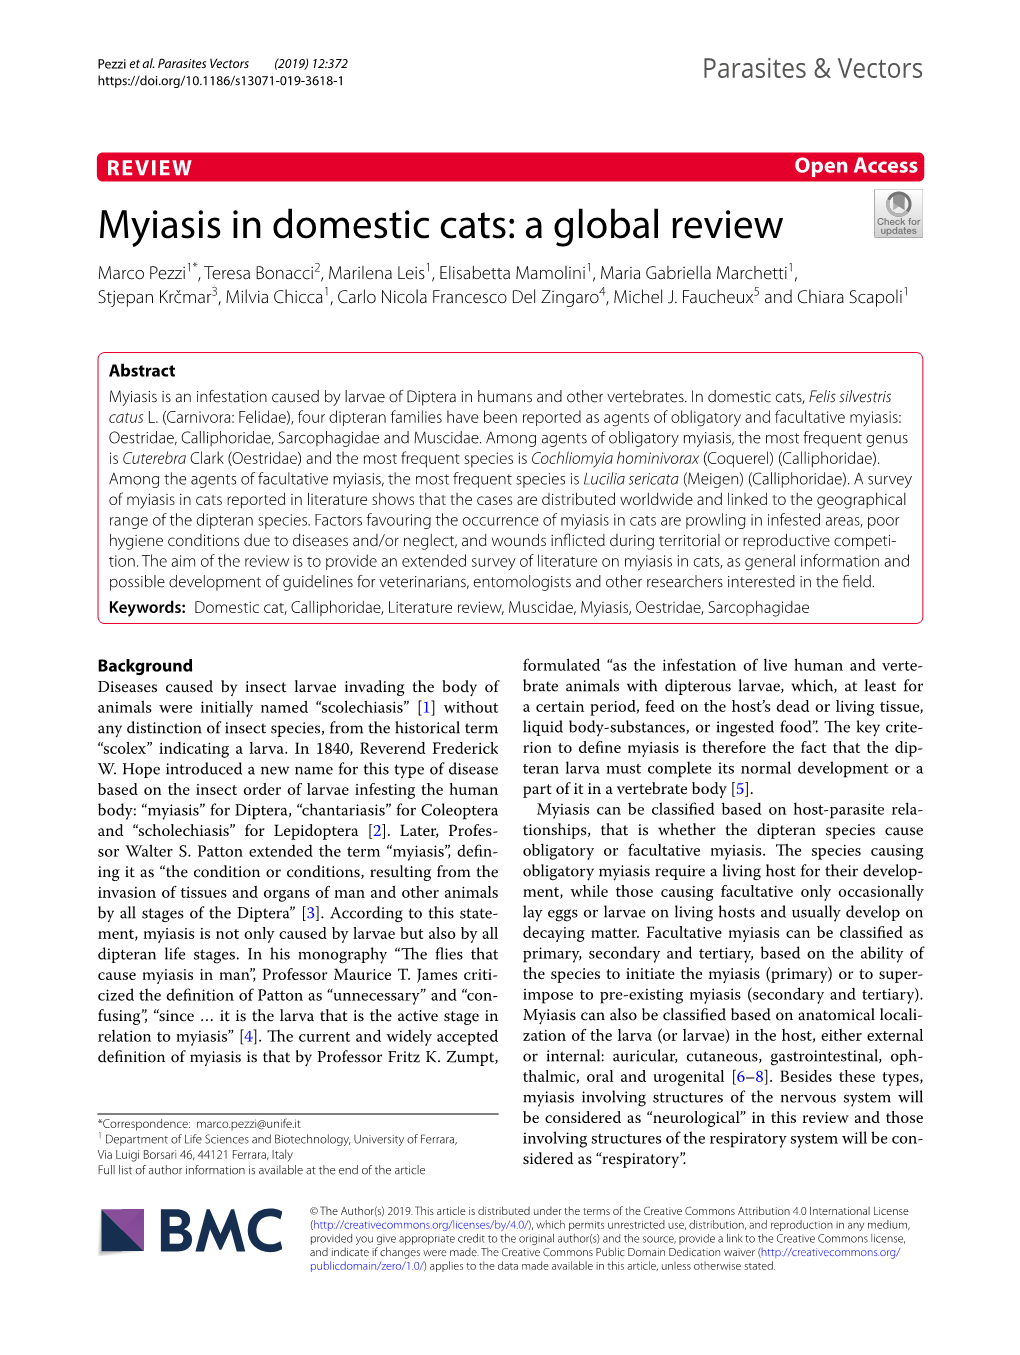 Myiasis in Domestic Cats: a Global Review